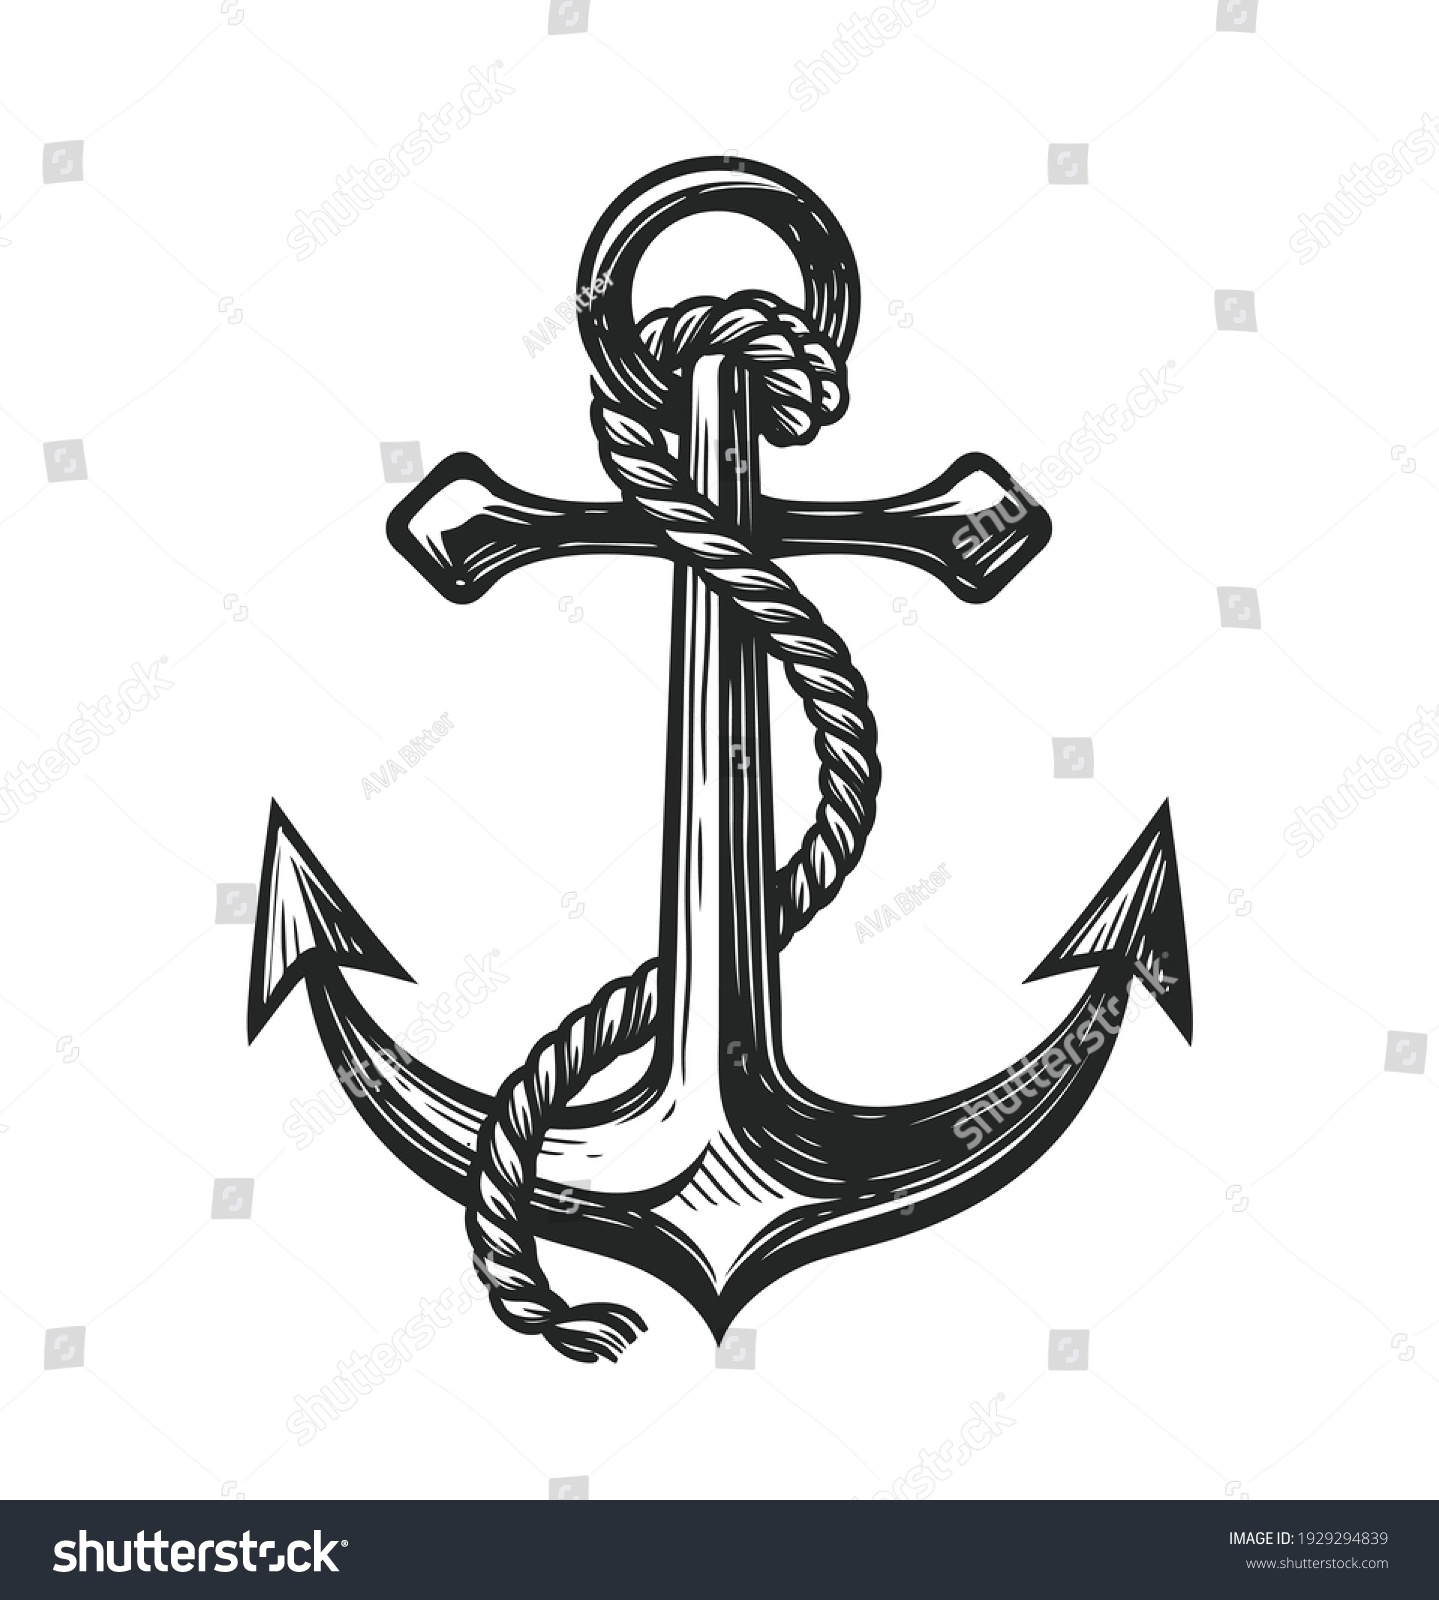 SVG of Anchor with rope symbol. Nautical concept sketch vector illustration svg